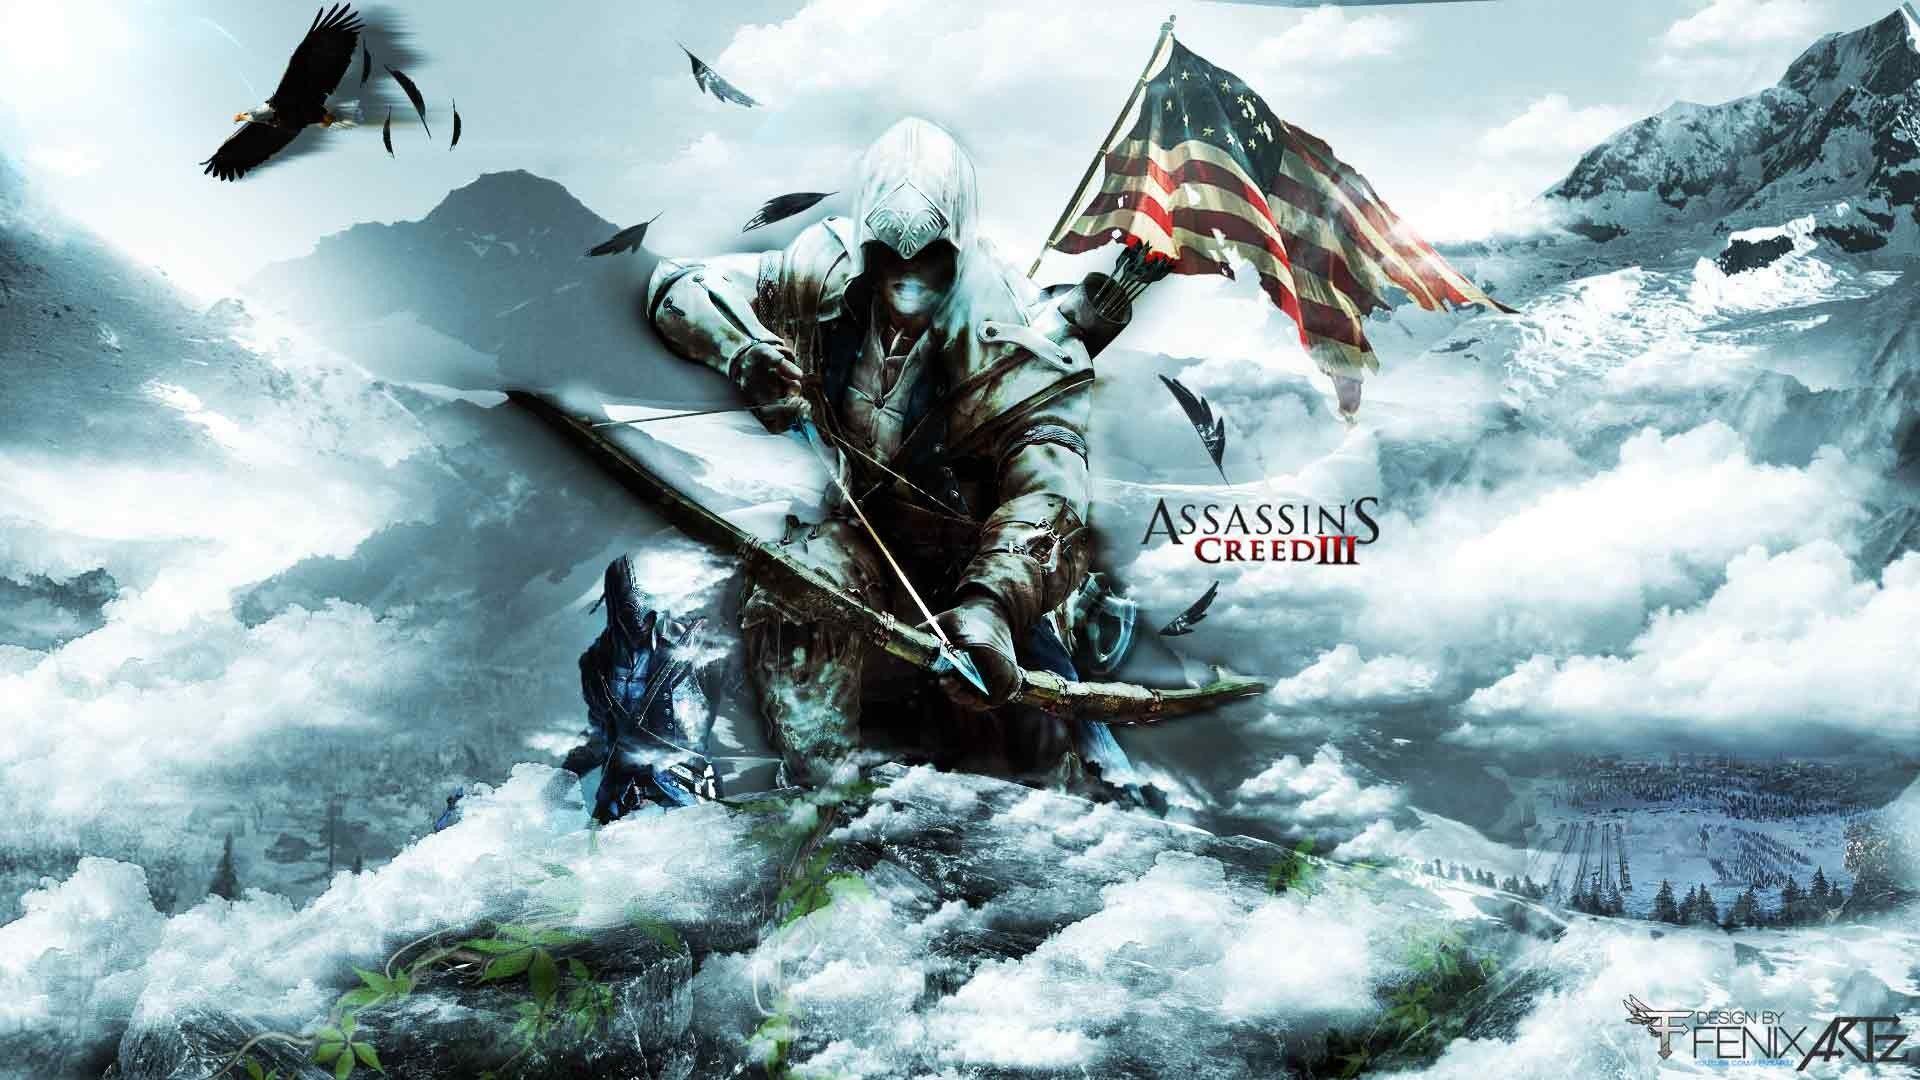 Awesome Assassins Creed 3 Wallpapers Top Free Awesome Assassins